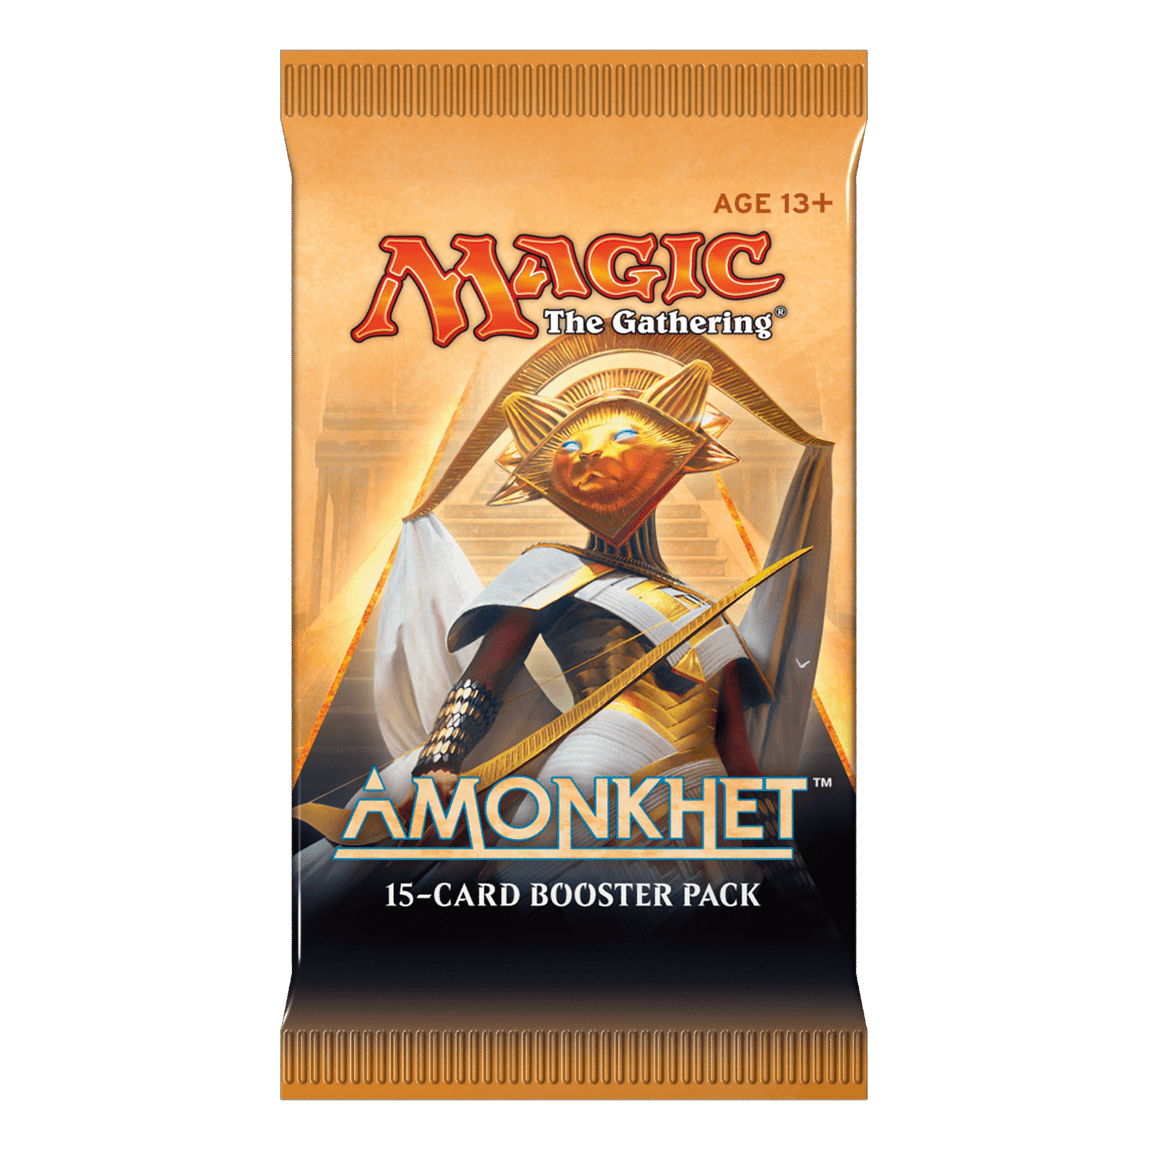 Amonkhet Booster Pack packaging 